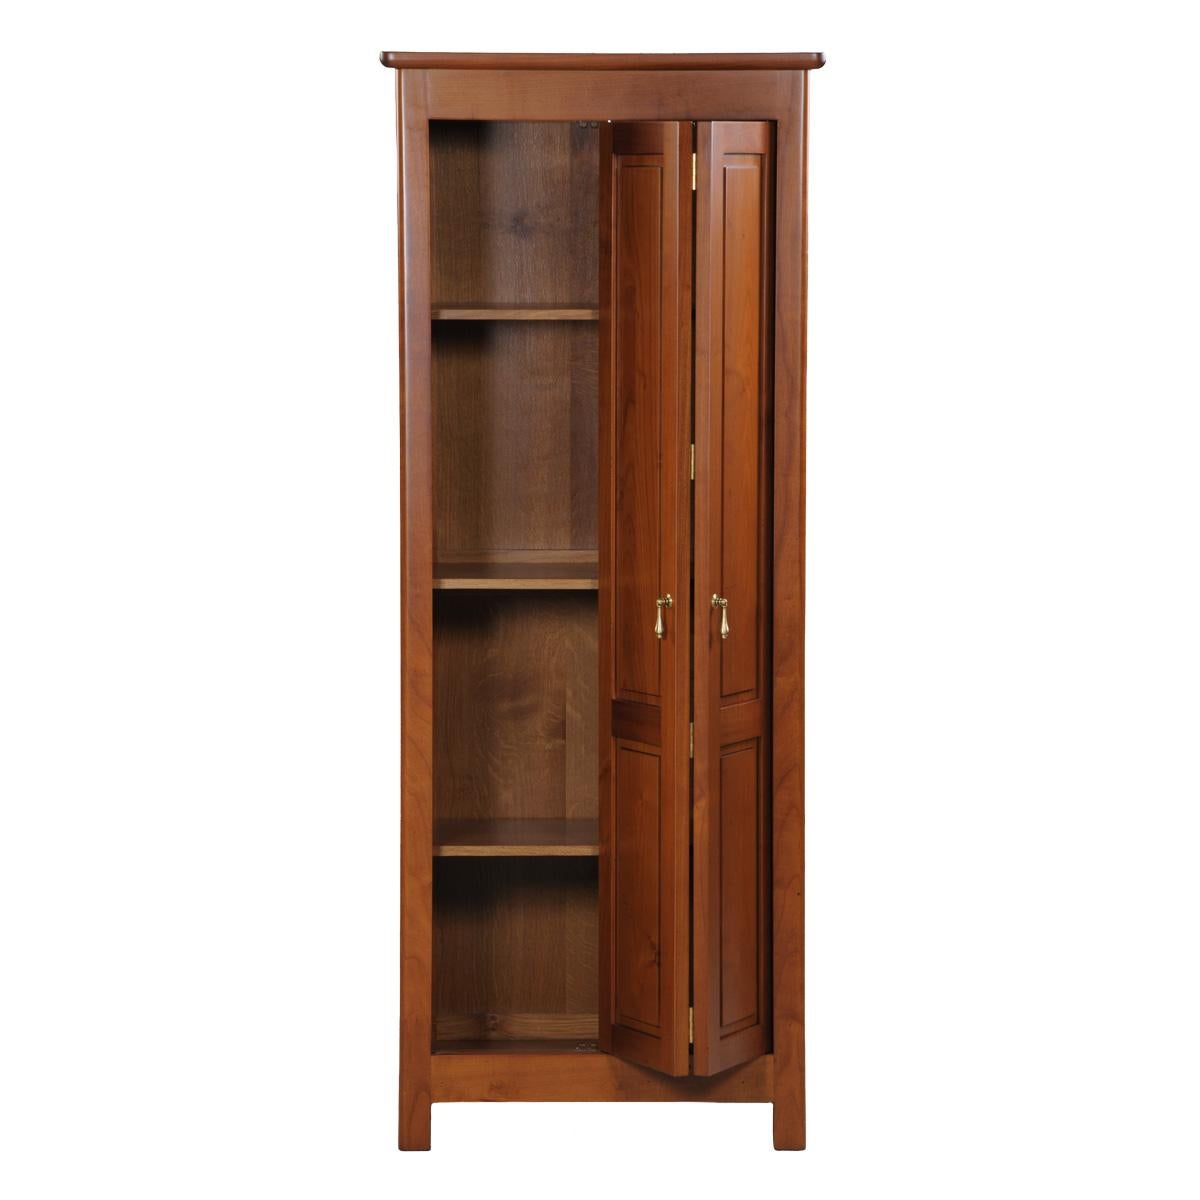 This French armoire is part of the Mélanie collection, a modern interpretation of the French Directoire style of the late 18th century. The Directoire style is famous for its straight, classic and timeless lines embellished with diamonds, grooves or